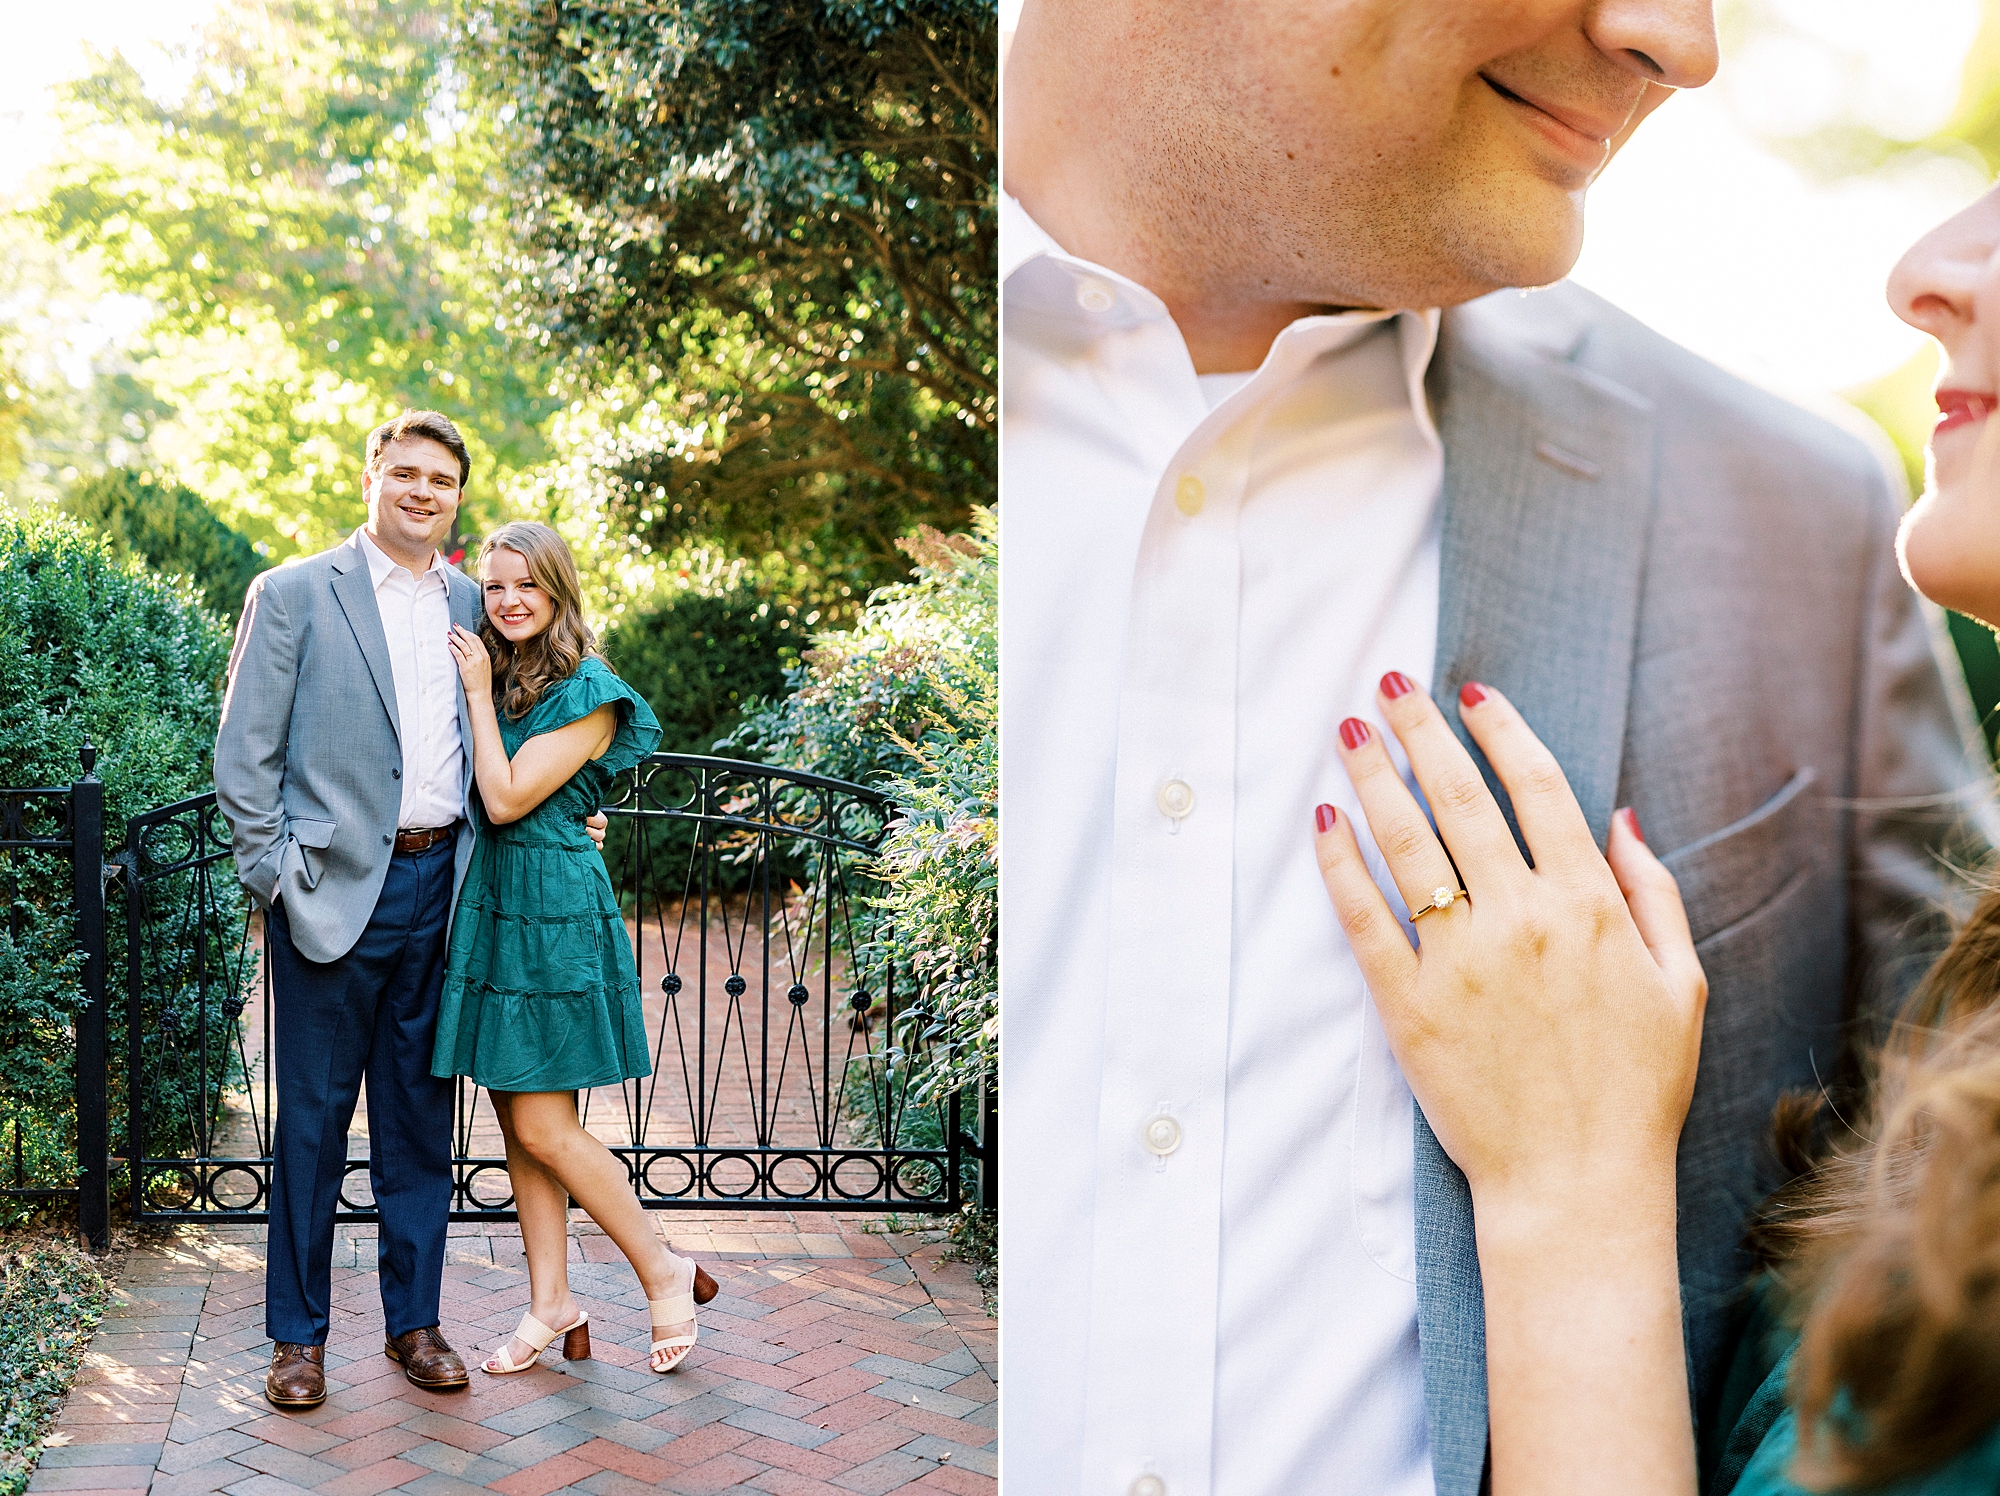 bride puts hand on groom's grey jacket showing off engagement ring 